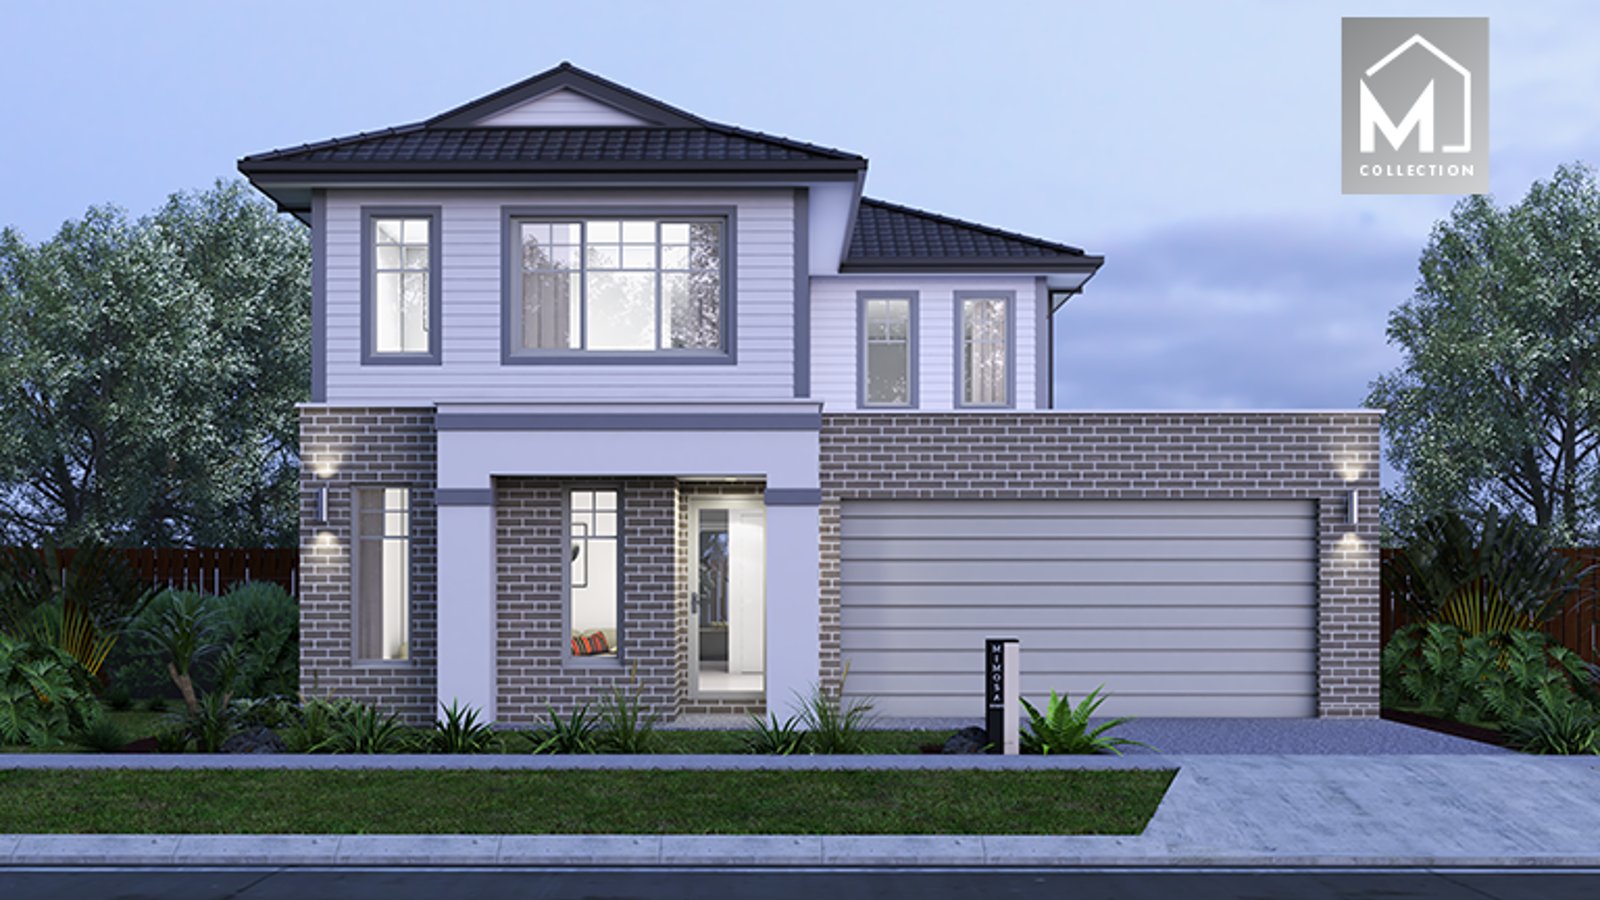 Photo of Lot 129 #19 McKenzie Drive - Somerford Estate, Clyde North VIC 3978 AUS